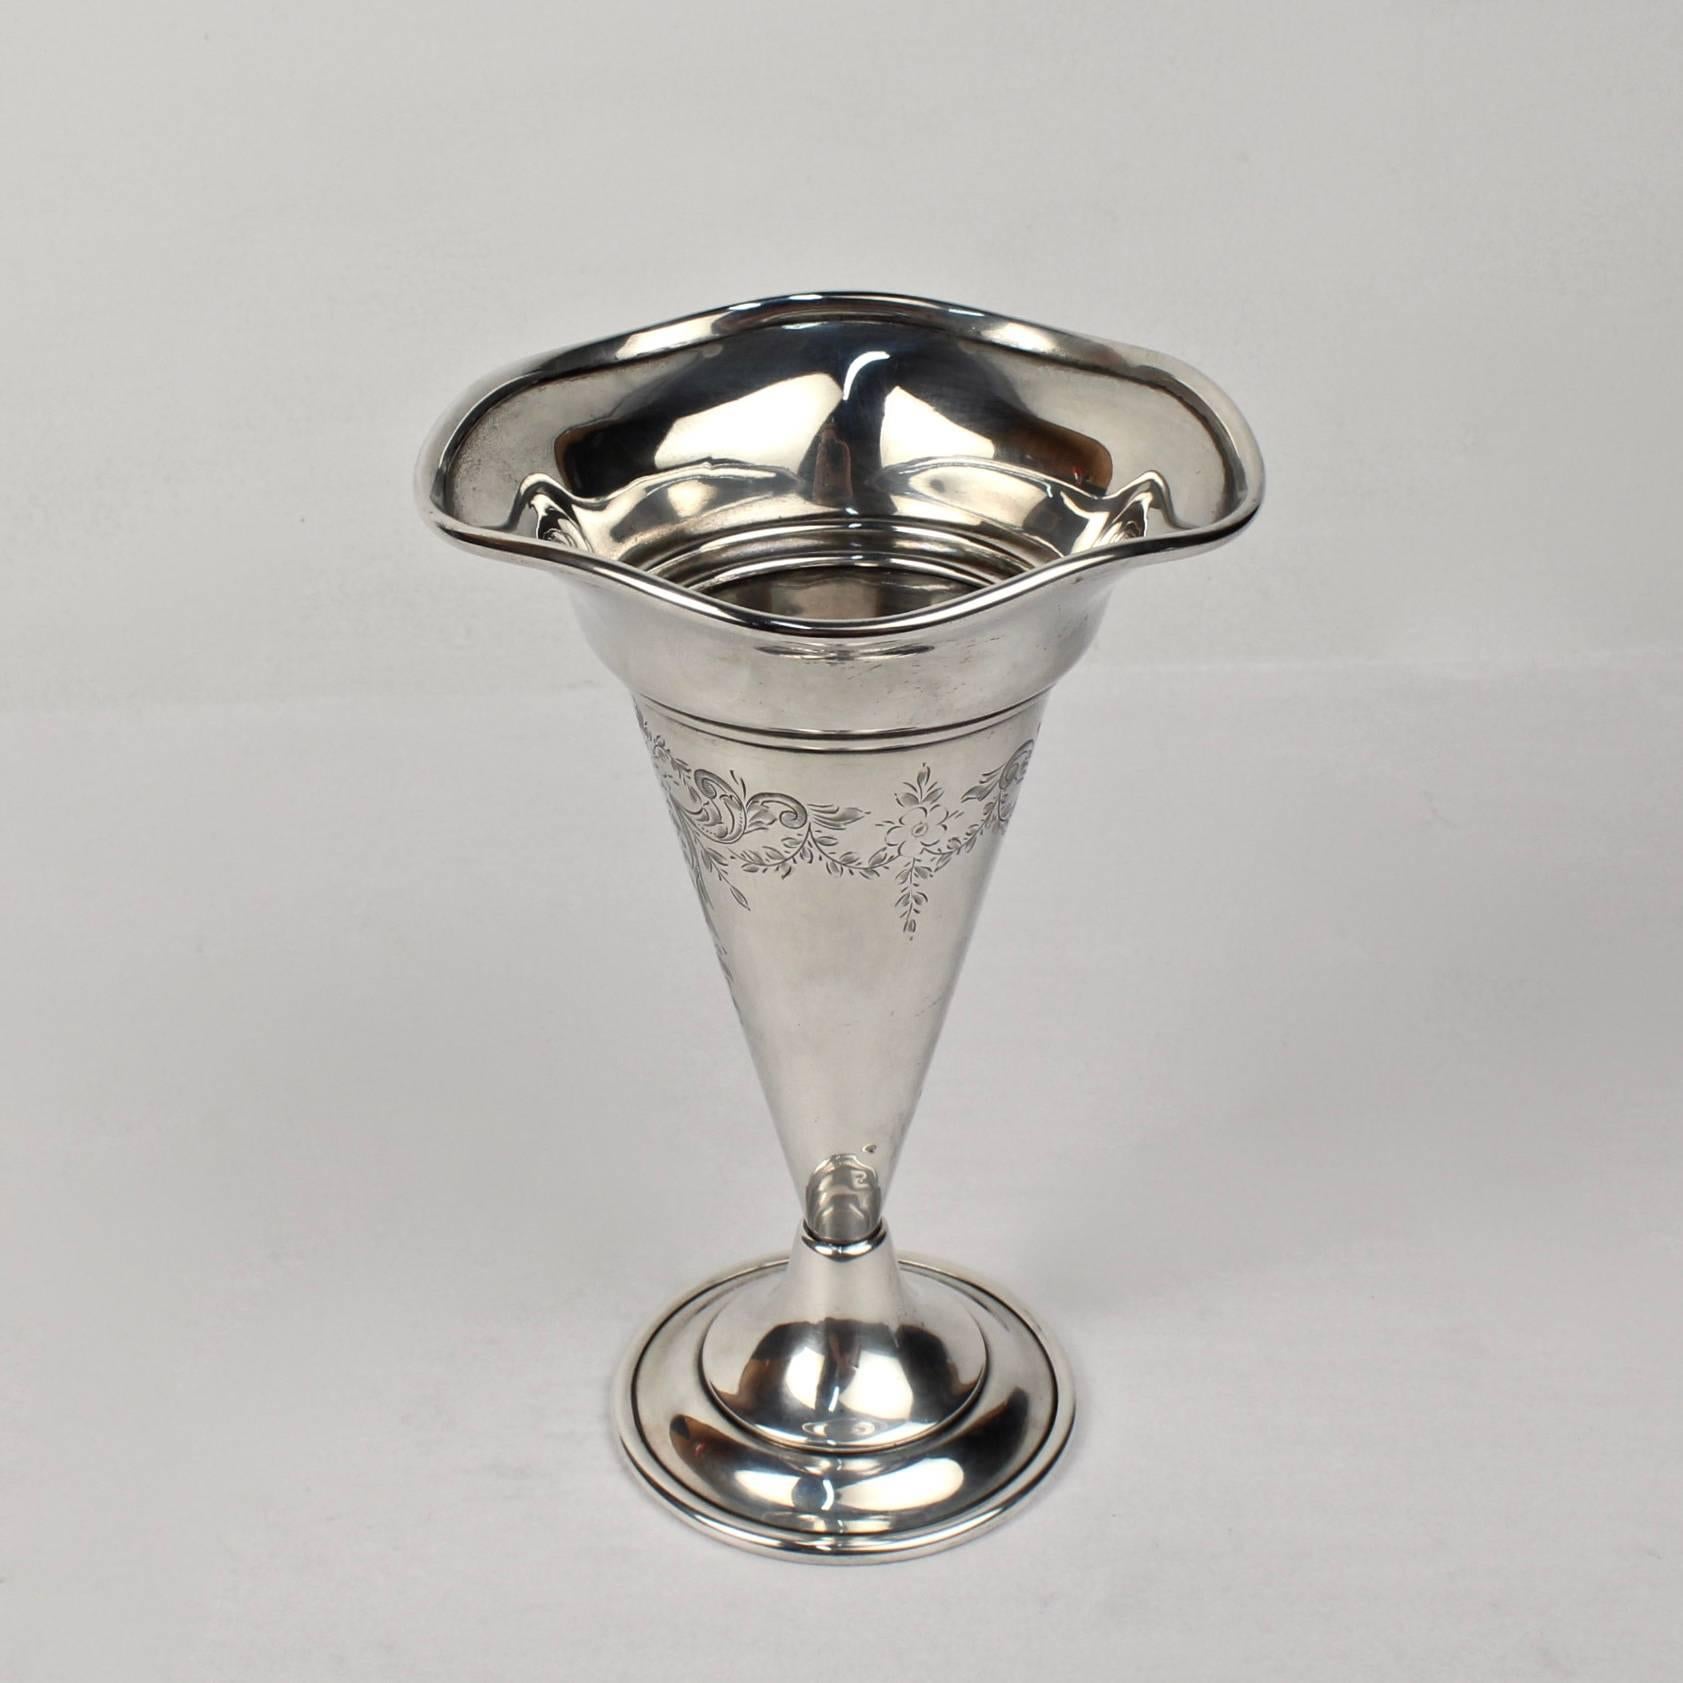 20th Century Antique American Sterling Silver Trumpet Form Flower Vase by G. Henckel & Co